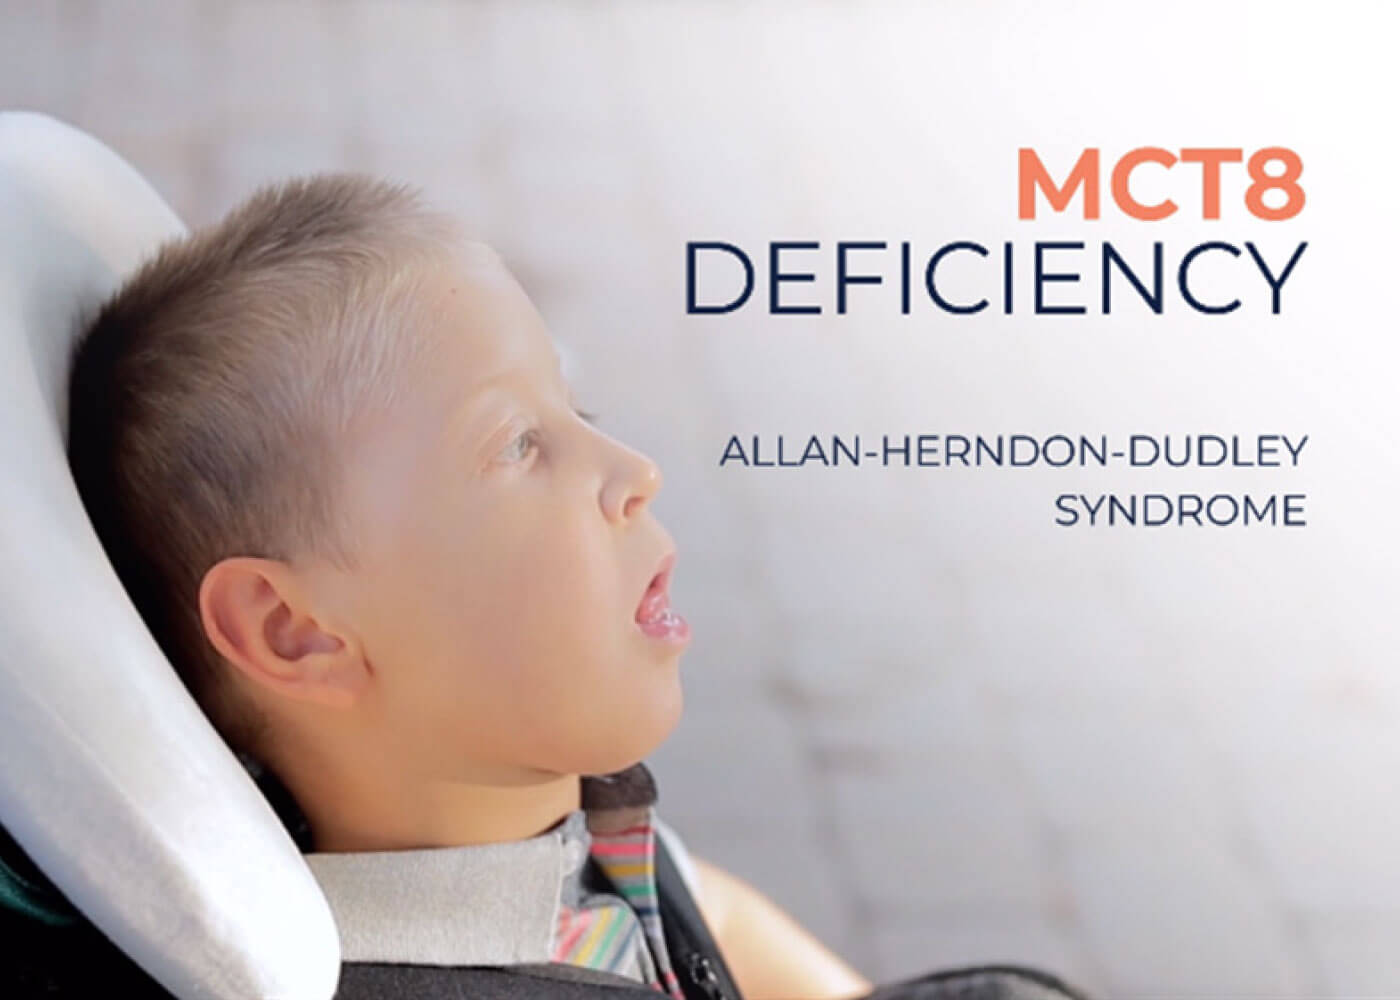 ABOUT MCT8 DEFICIENCY